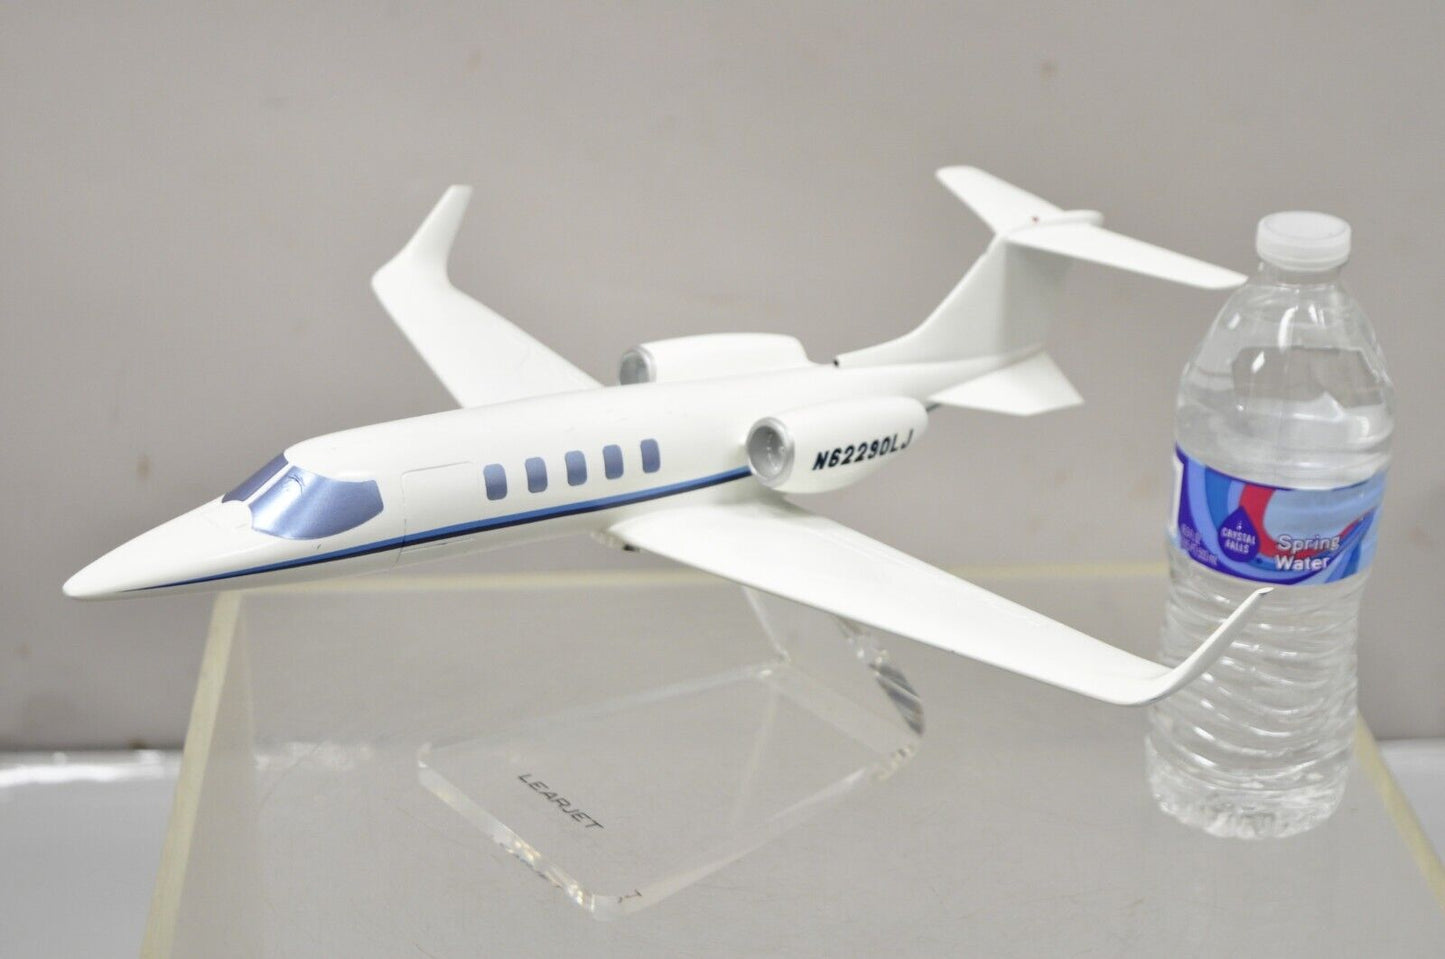 Vintage Learjet 16" Model Airplane Desk Plane Painted Metal on Acrylic Stand